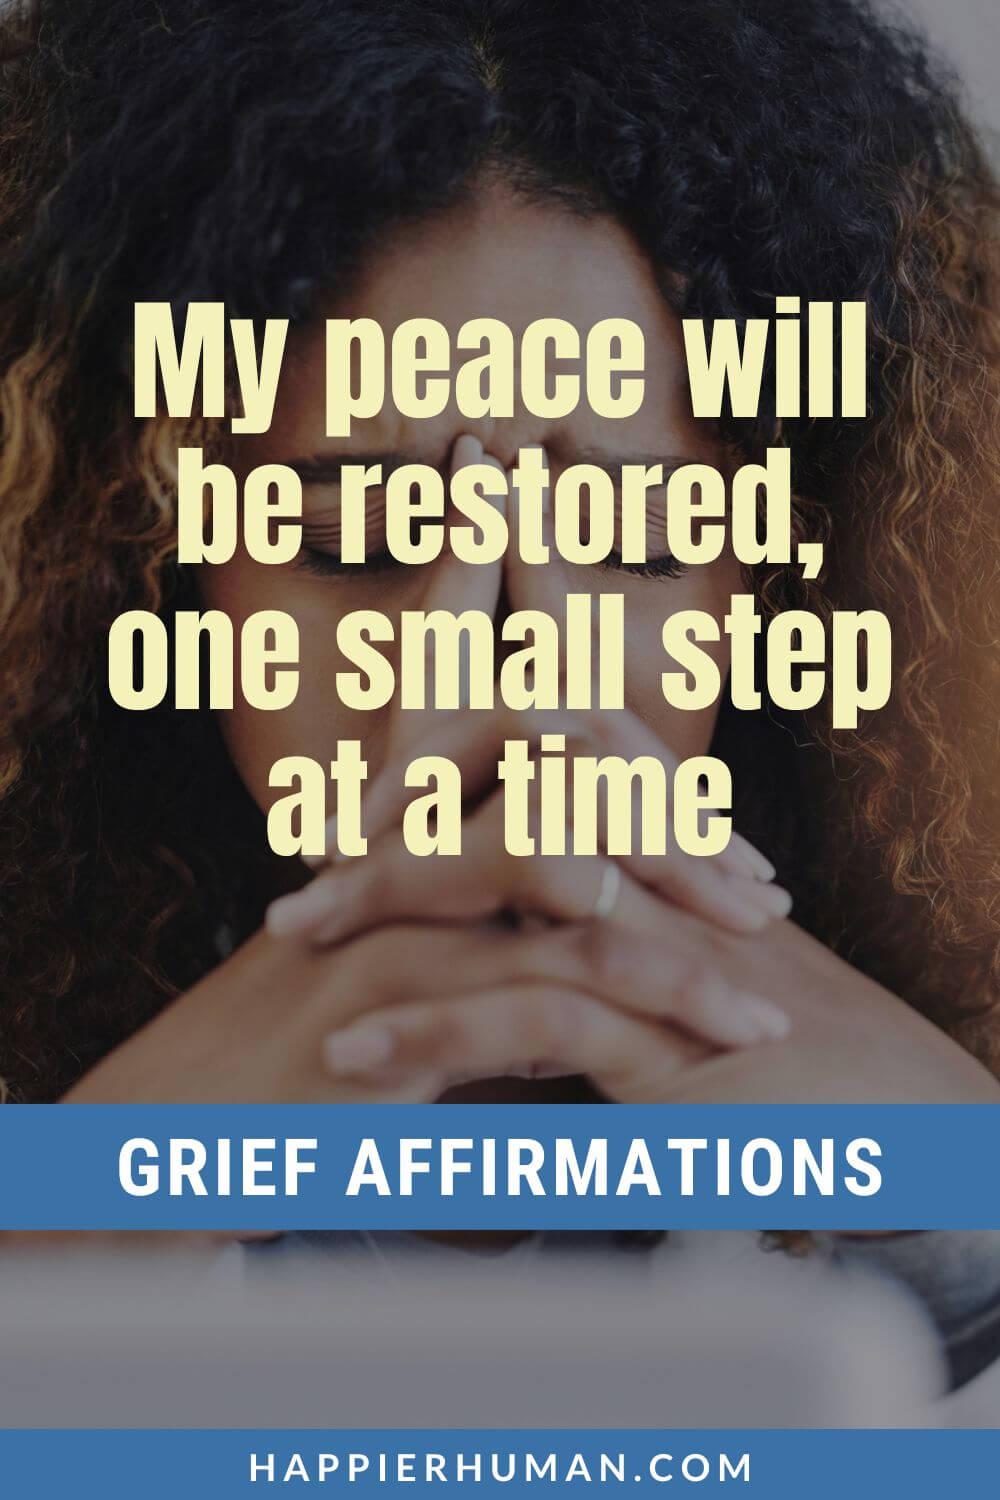 Grief Affirmations - My peace will be restored, one small step at a time | affirmations for a loved one | affirmations for loss of a pet | positive quotes for grief